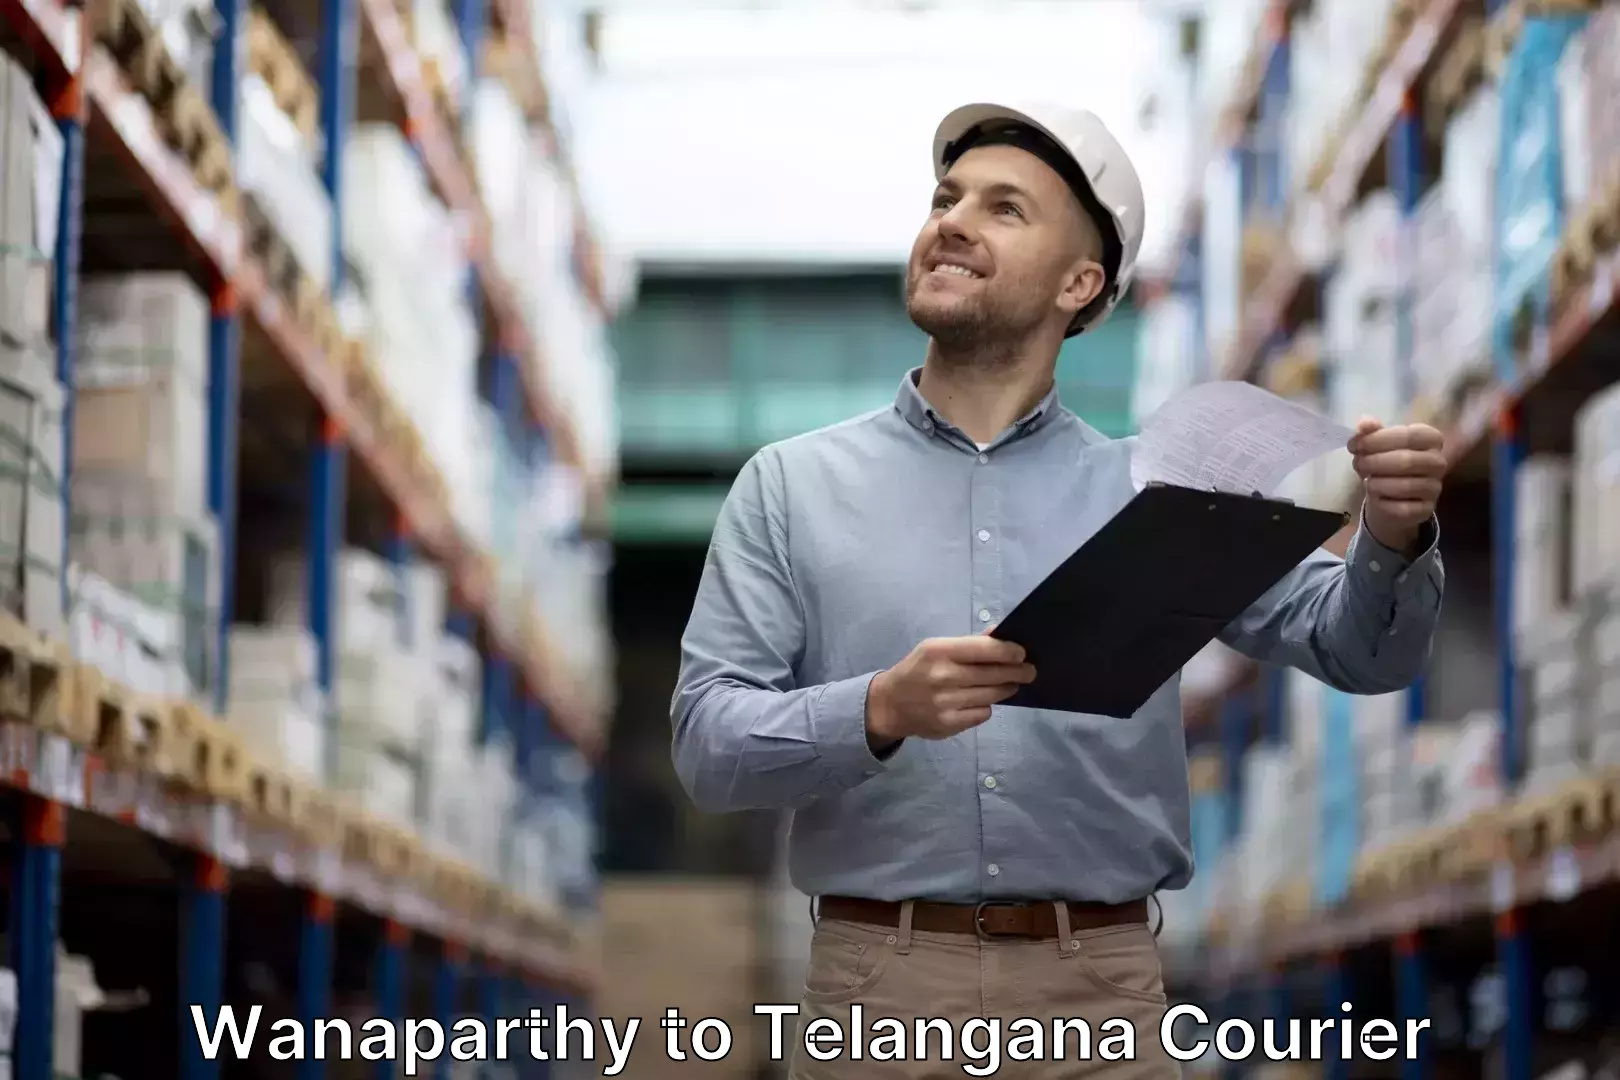 Baggage transport network Wanaparthy to Secunderabad